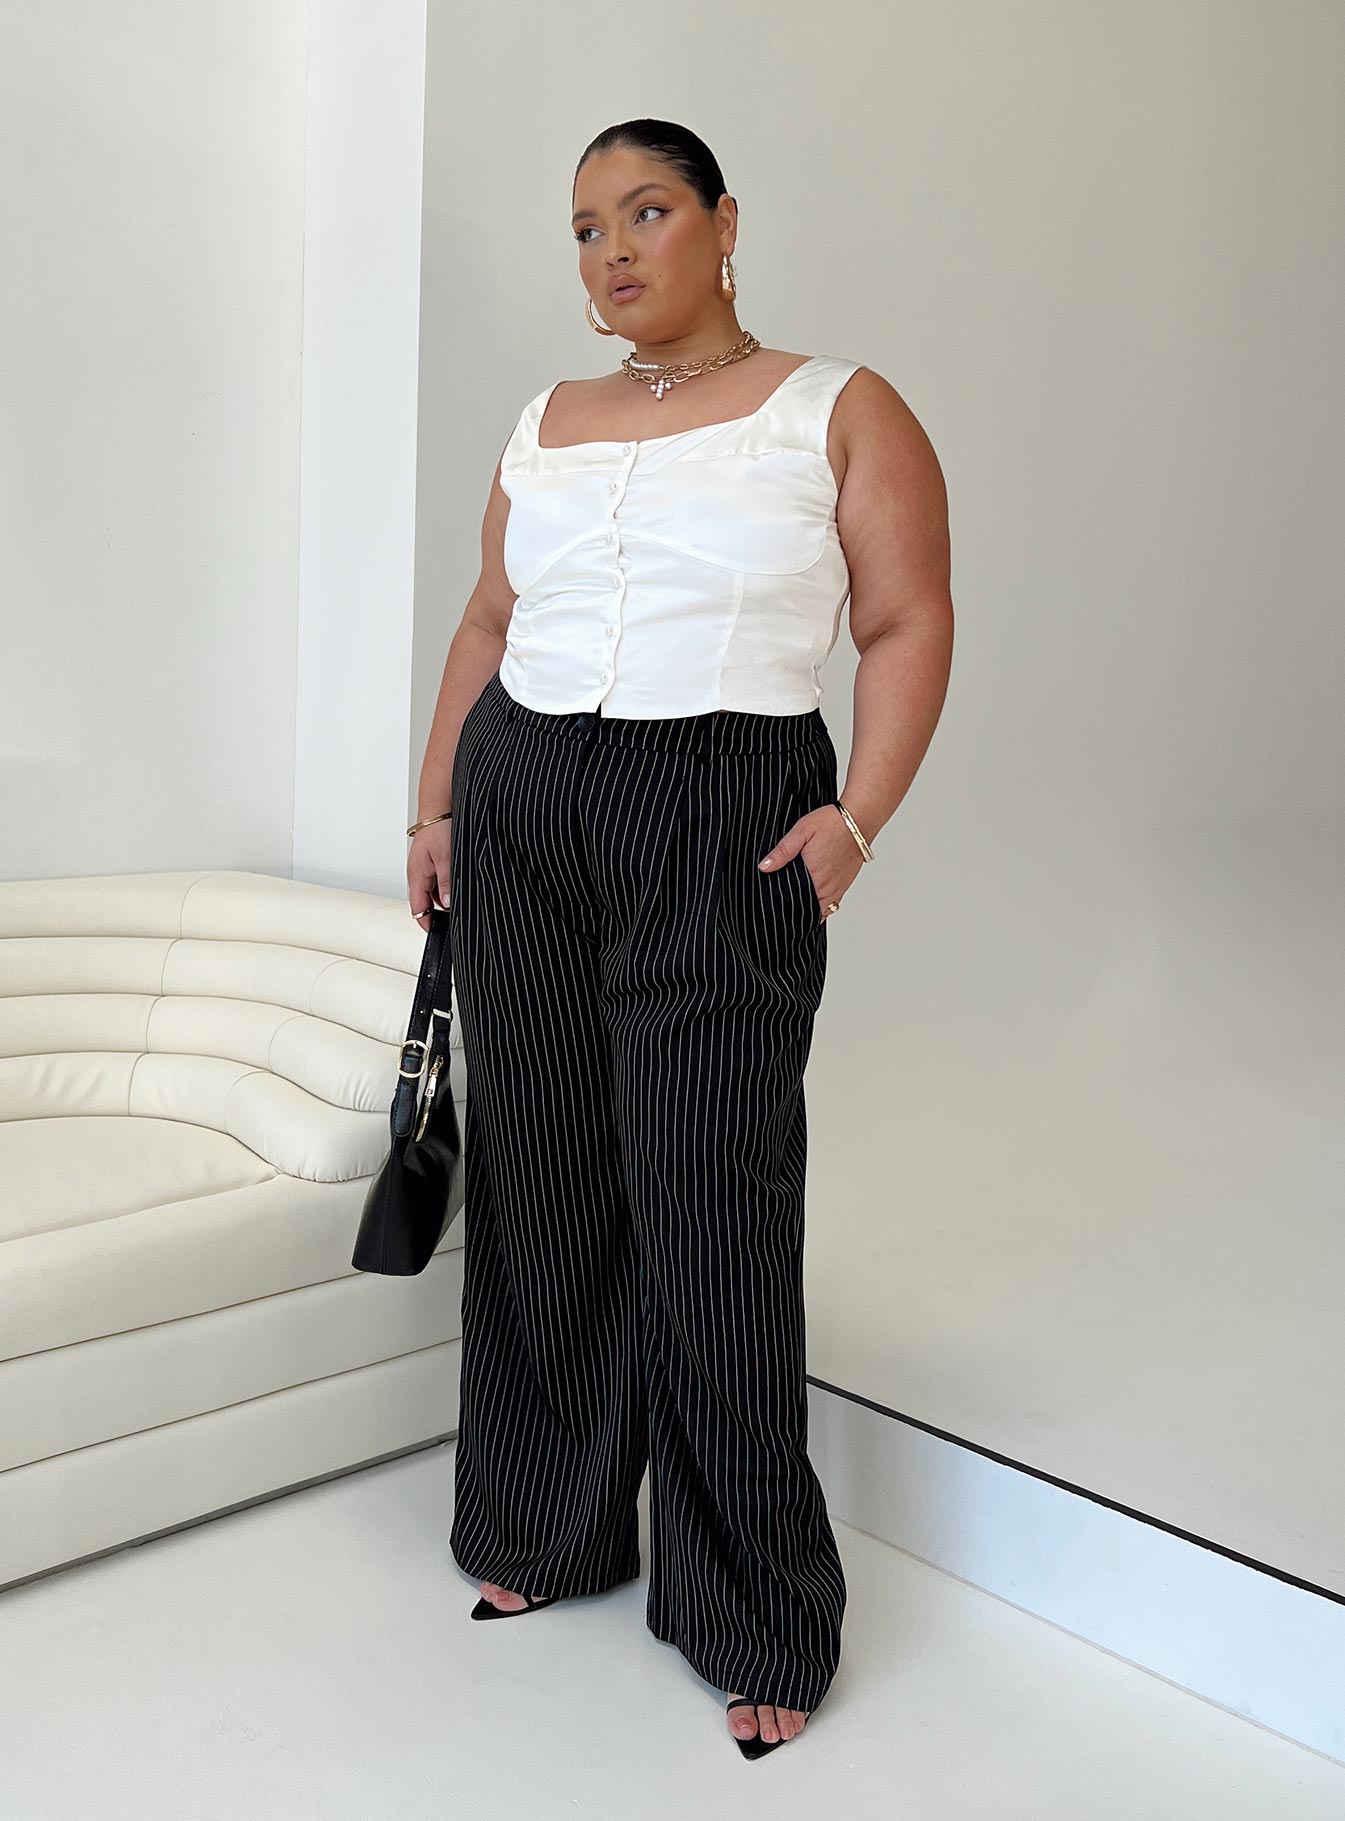 Shop Plus Size HighRise Stripe Palazzo Pants for Women from latest  collection at Forever 21  324239